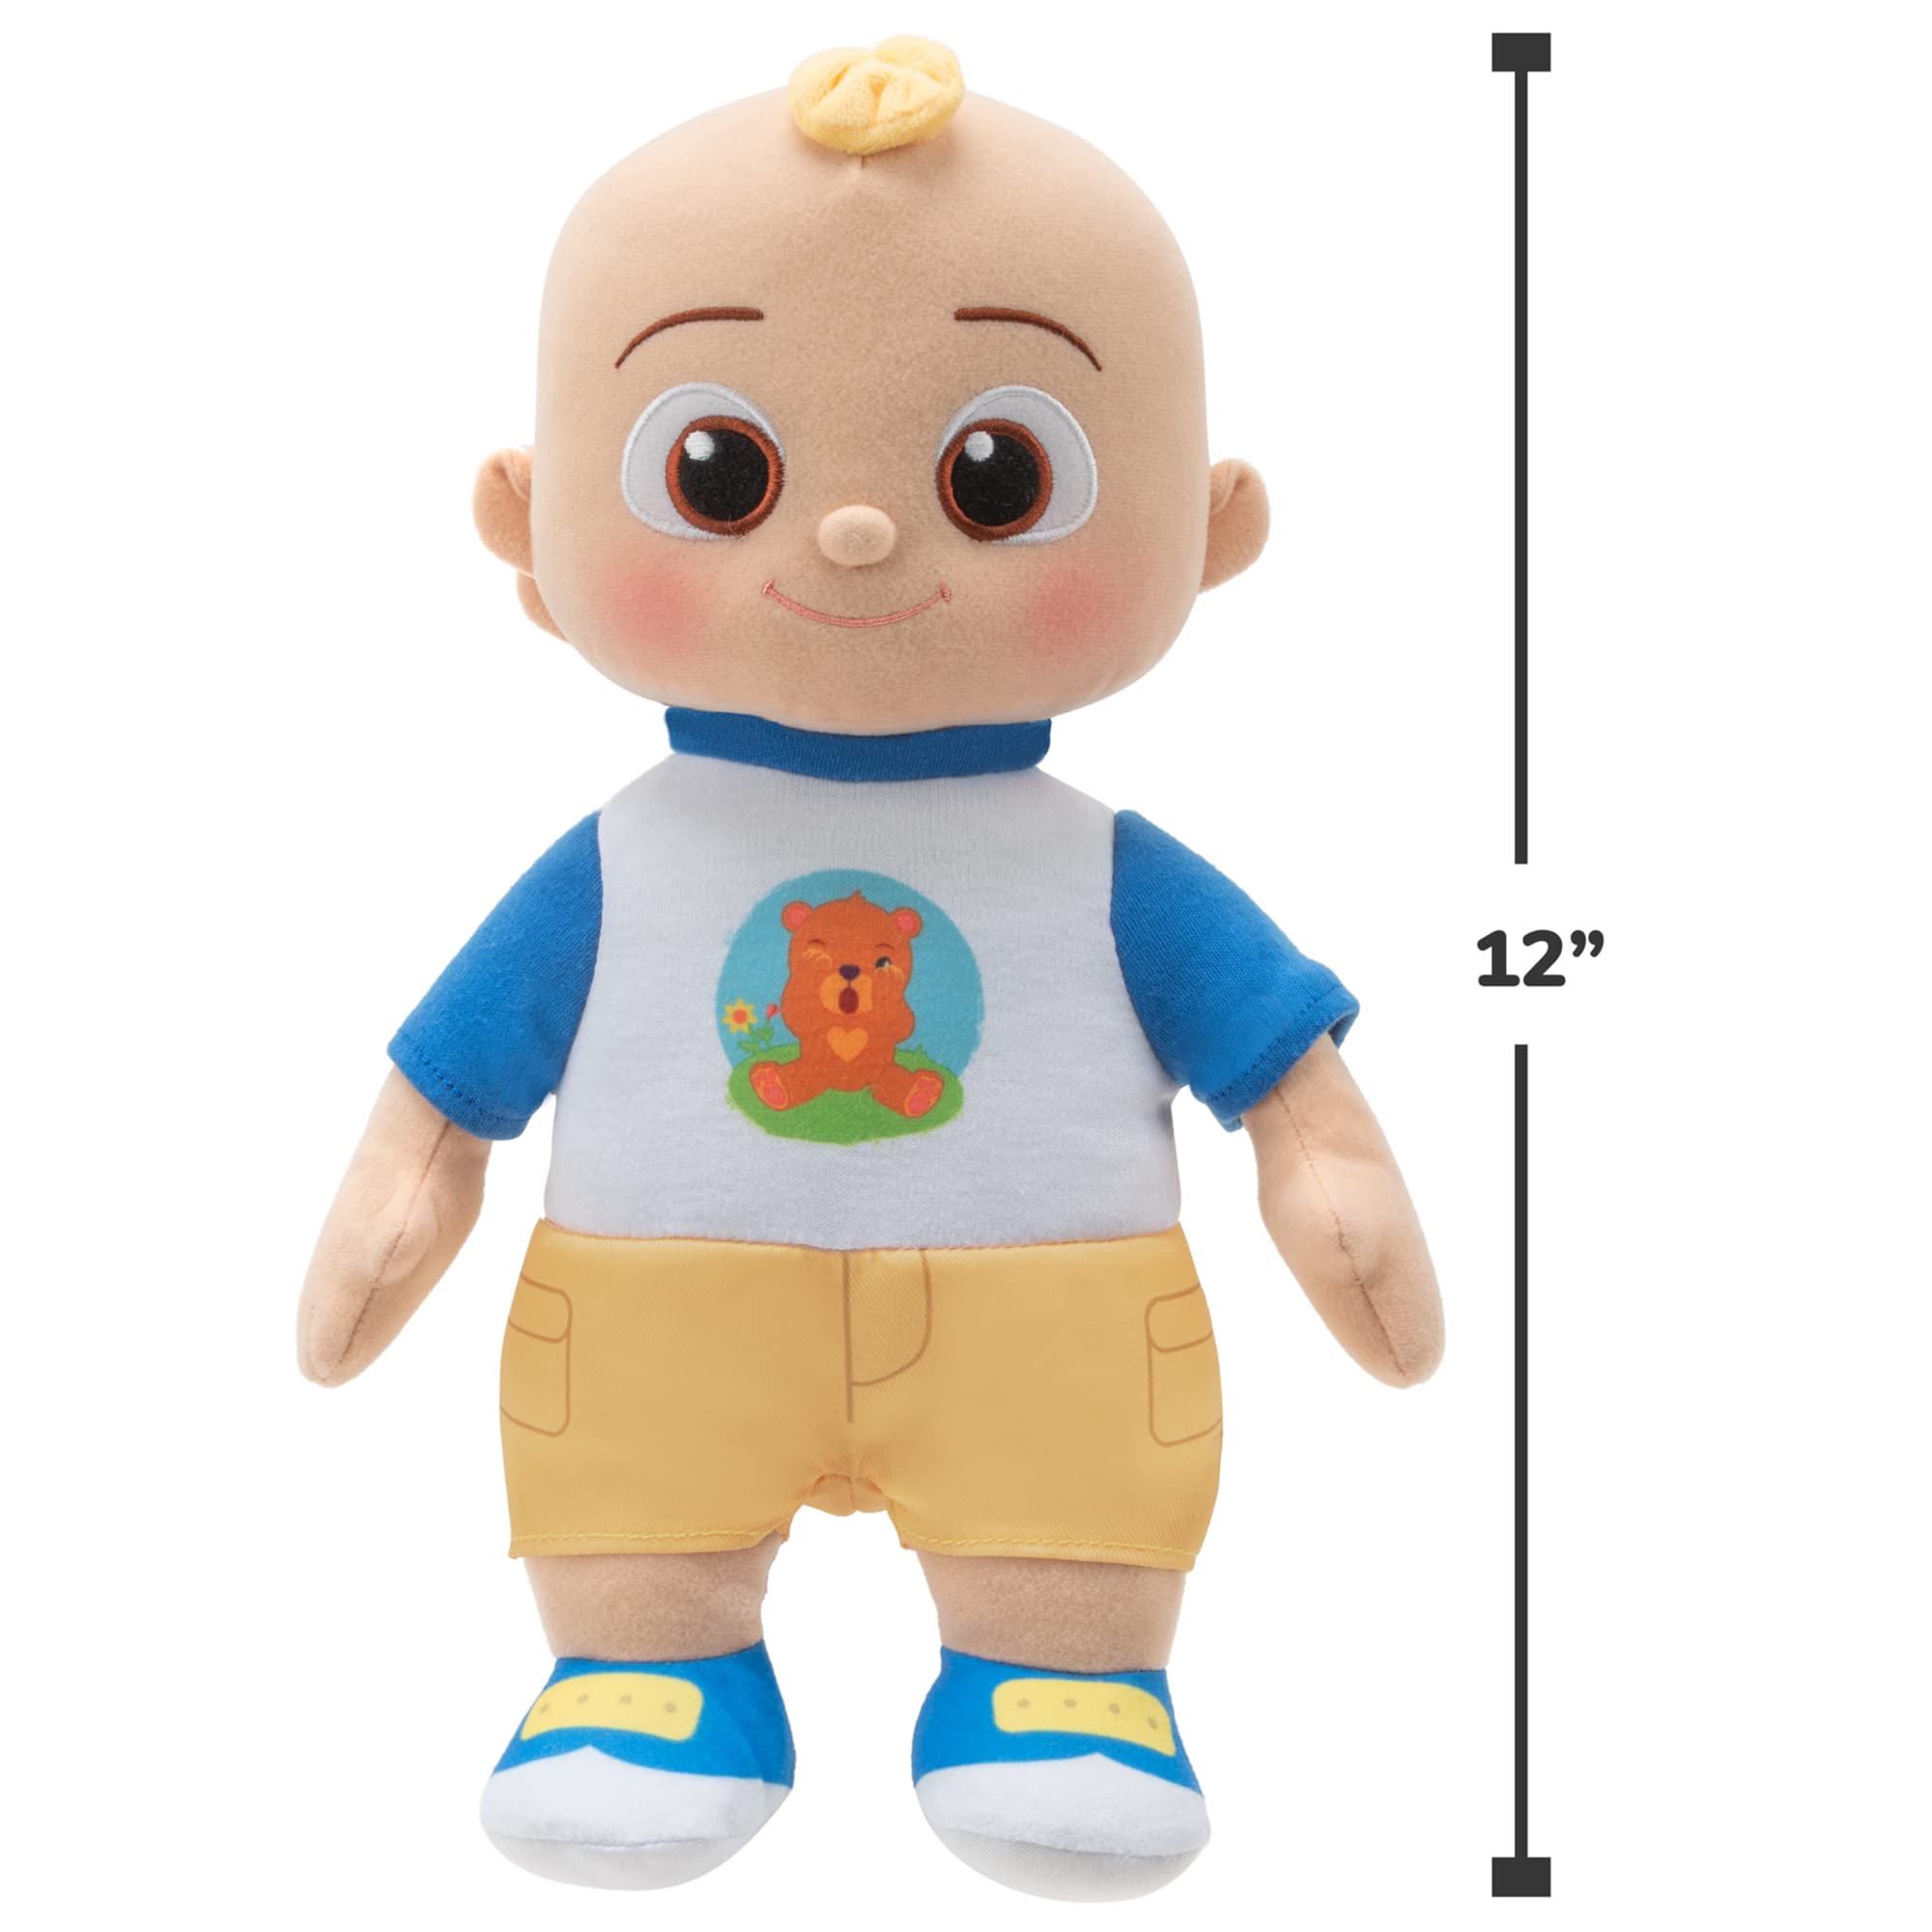 CoComelon Boo Boo JJ Deluxe Feature Plush - Includes Doctor Checkup Bag, Bandages, and Accessories to Care for JJ - 9 Total Accessories - Amazon Exclusive